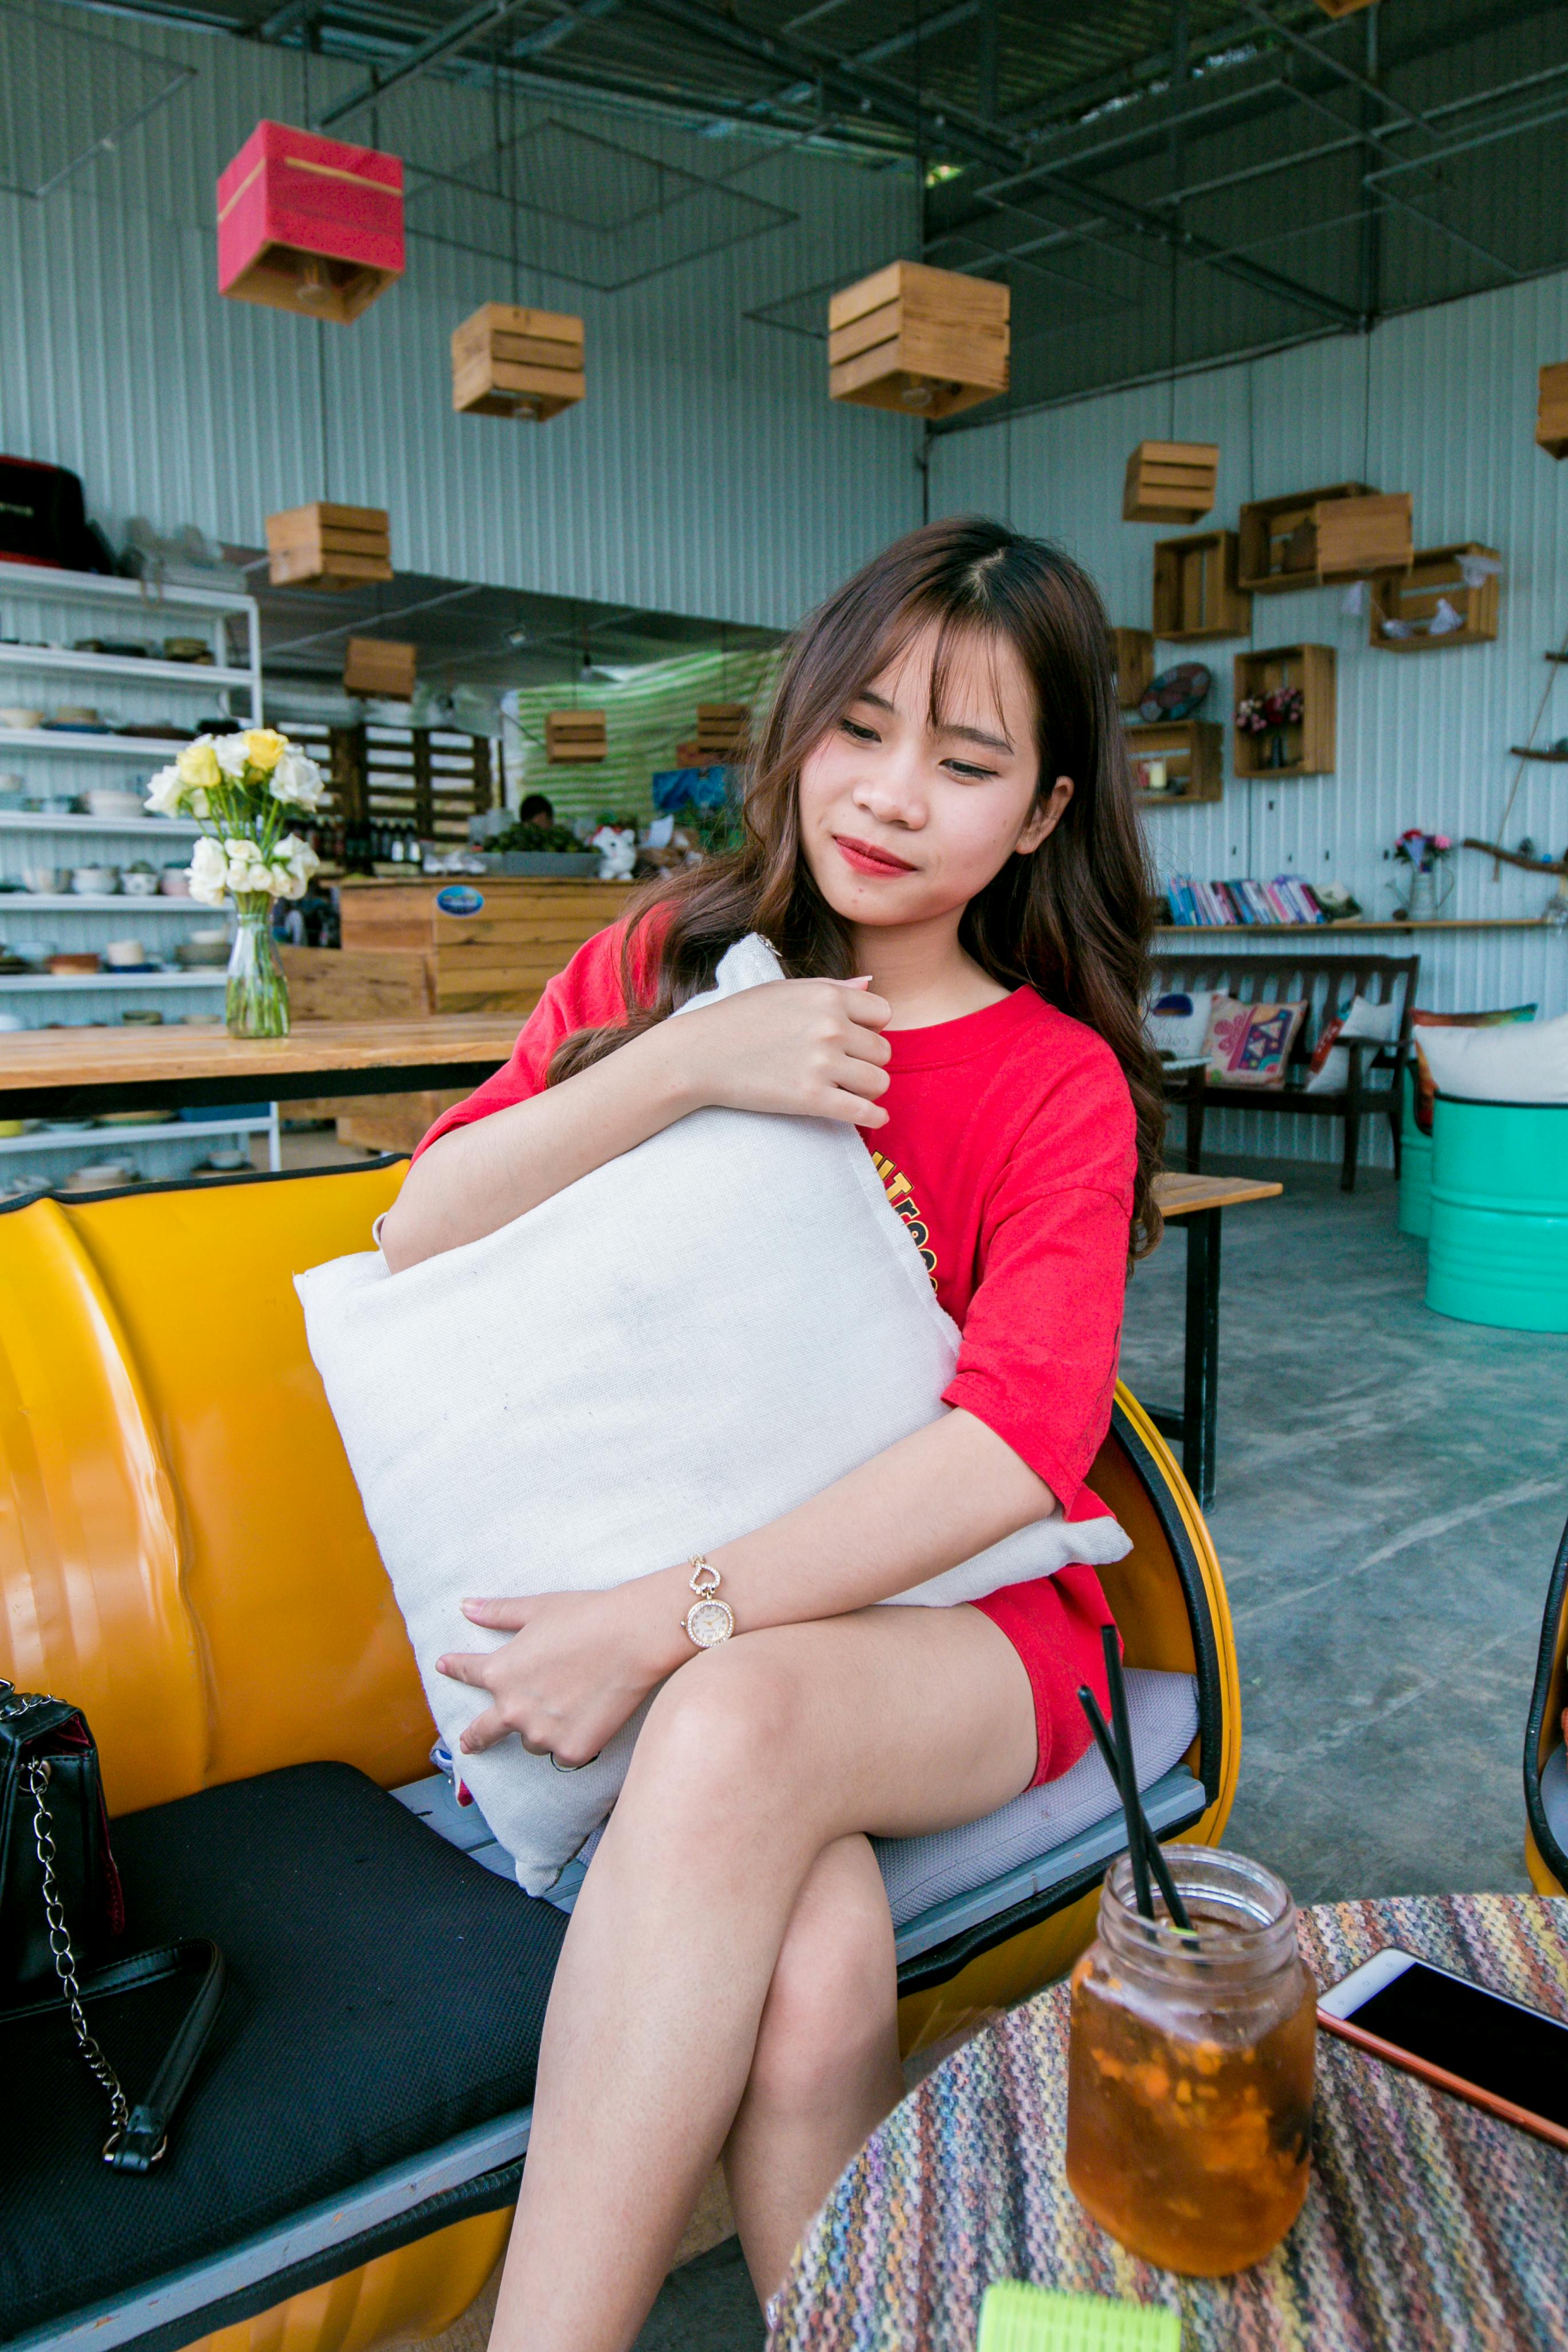 Smiling Woman Wearing Red Lipstick and Red Shirt Holding White Throw Pillow \u00b7 Free Stock Photo